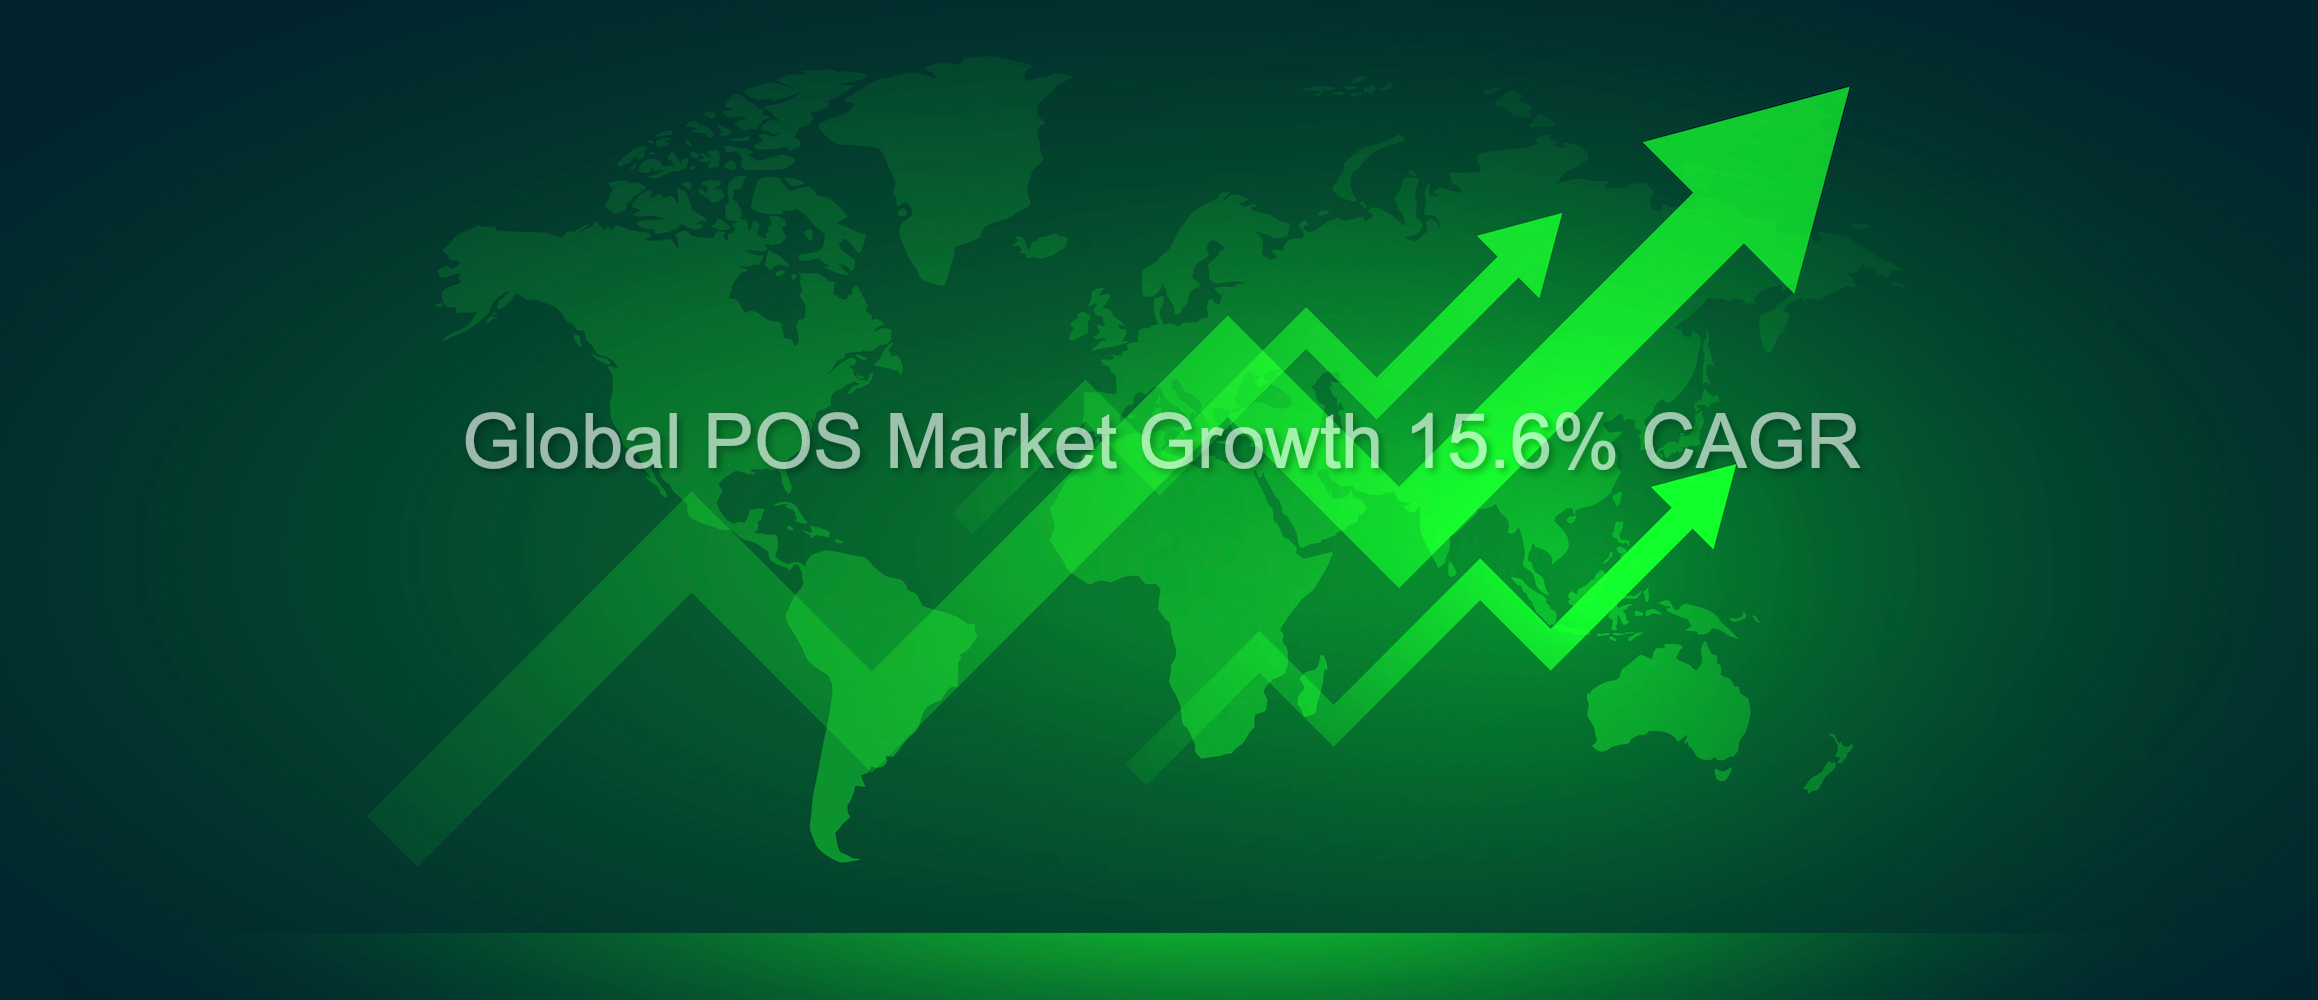 2021 Global Point of Sale (POS) Market Forecast to Grow at a CAGR of 15.6% 